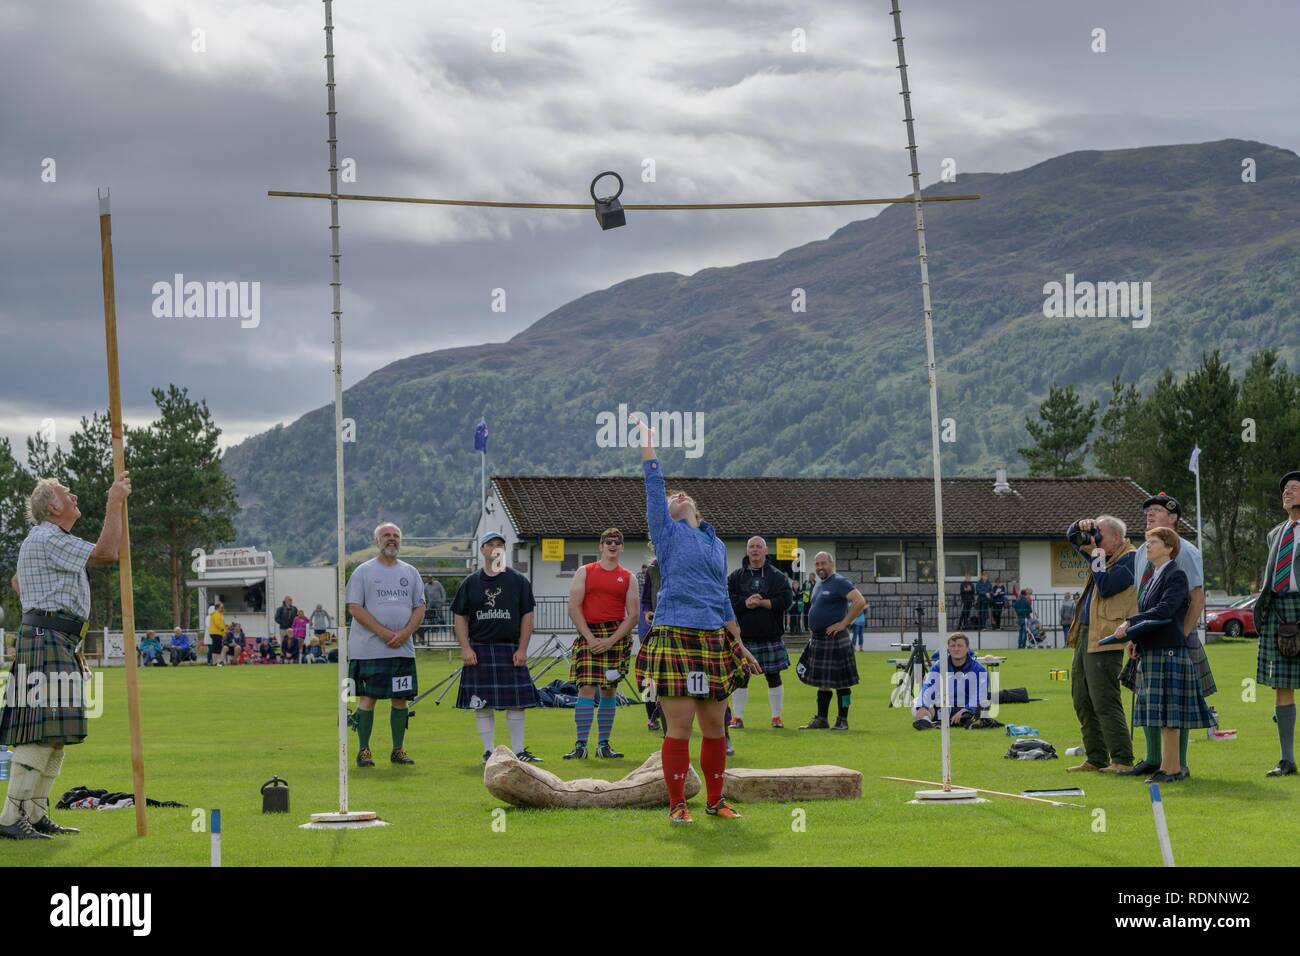 Woman at Weight for height contest, Highland Games, Newtonmore, Scotland, United Kingdom Stock Photo